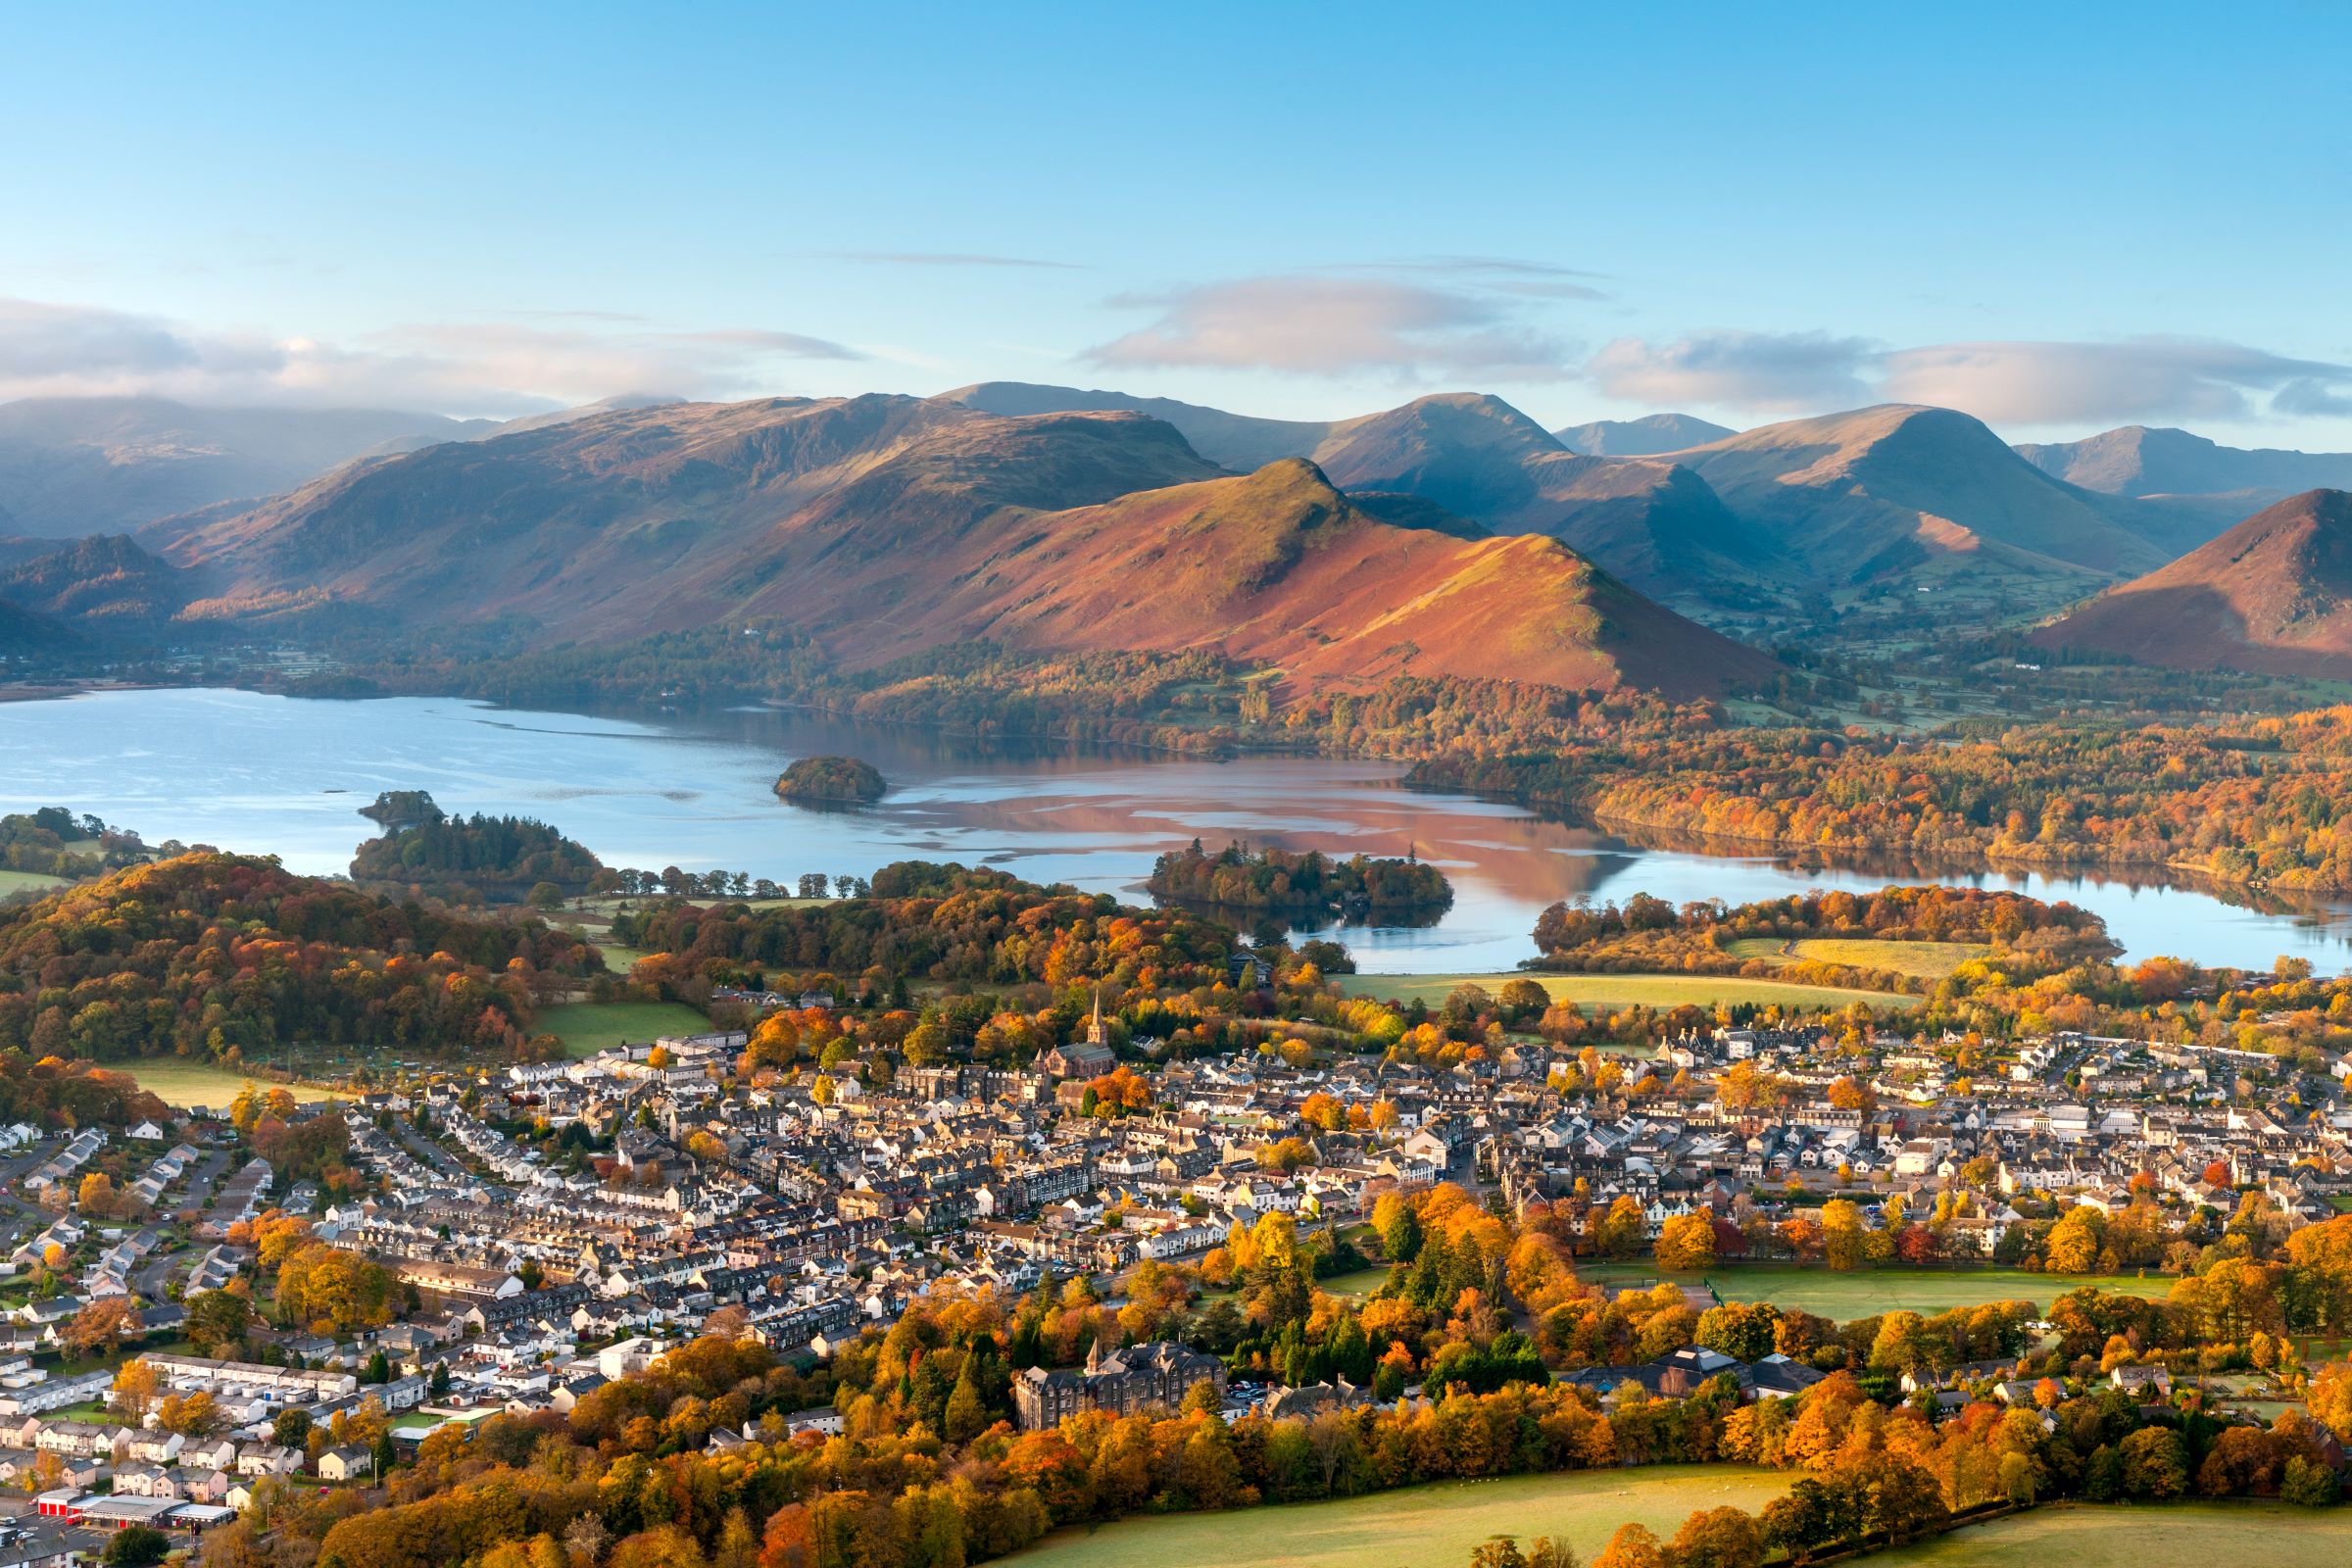 Lake District Travel Guide - Travel to Cumbria England